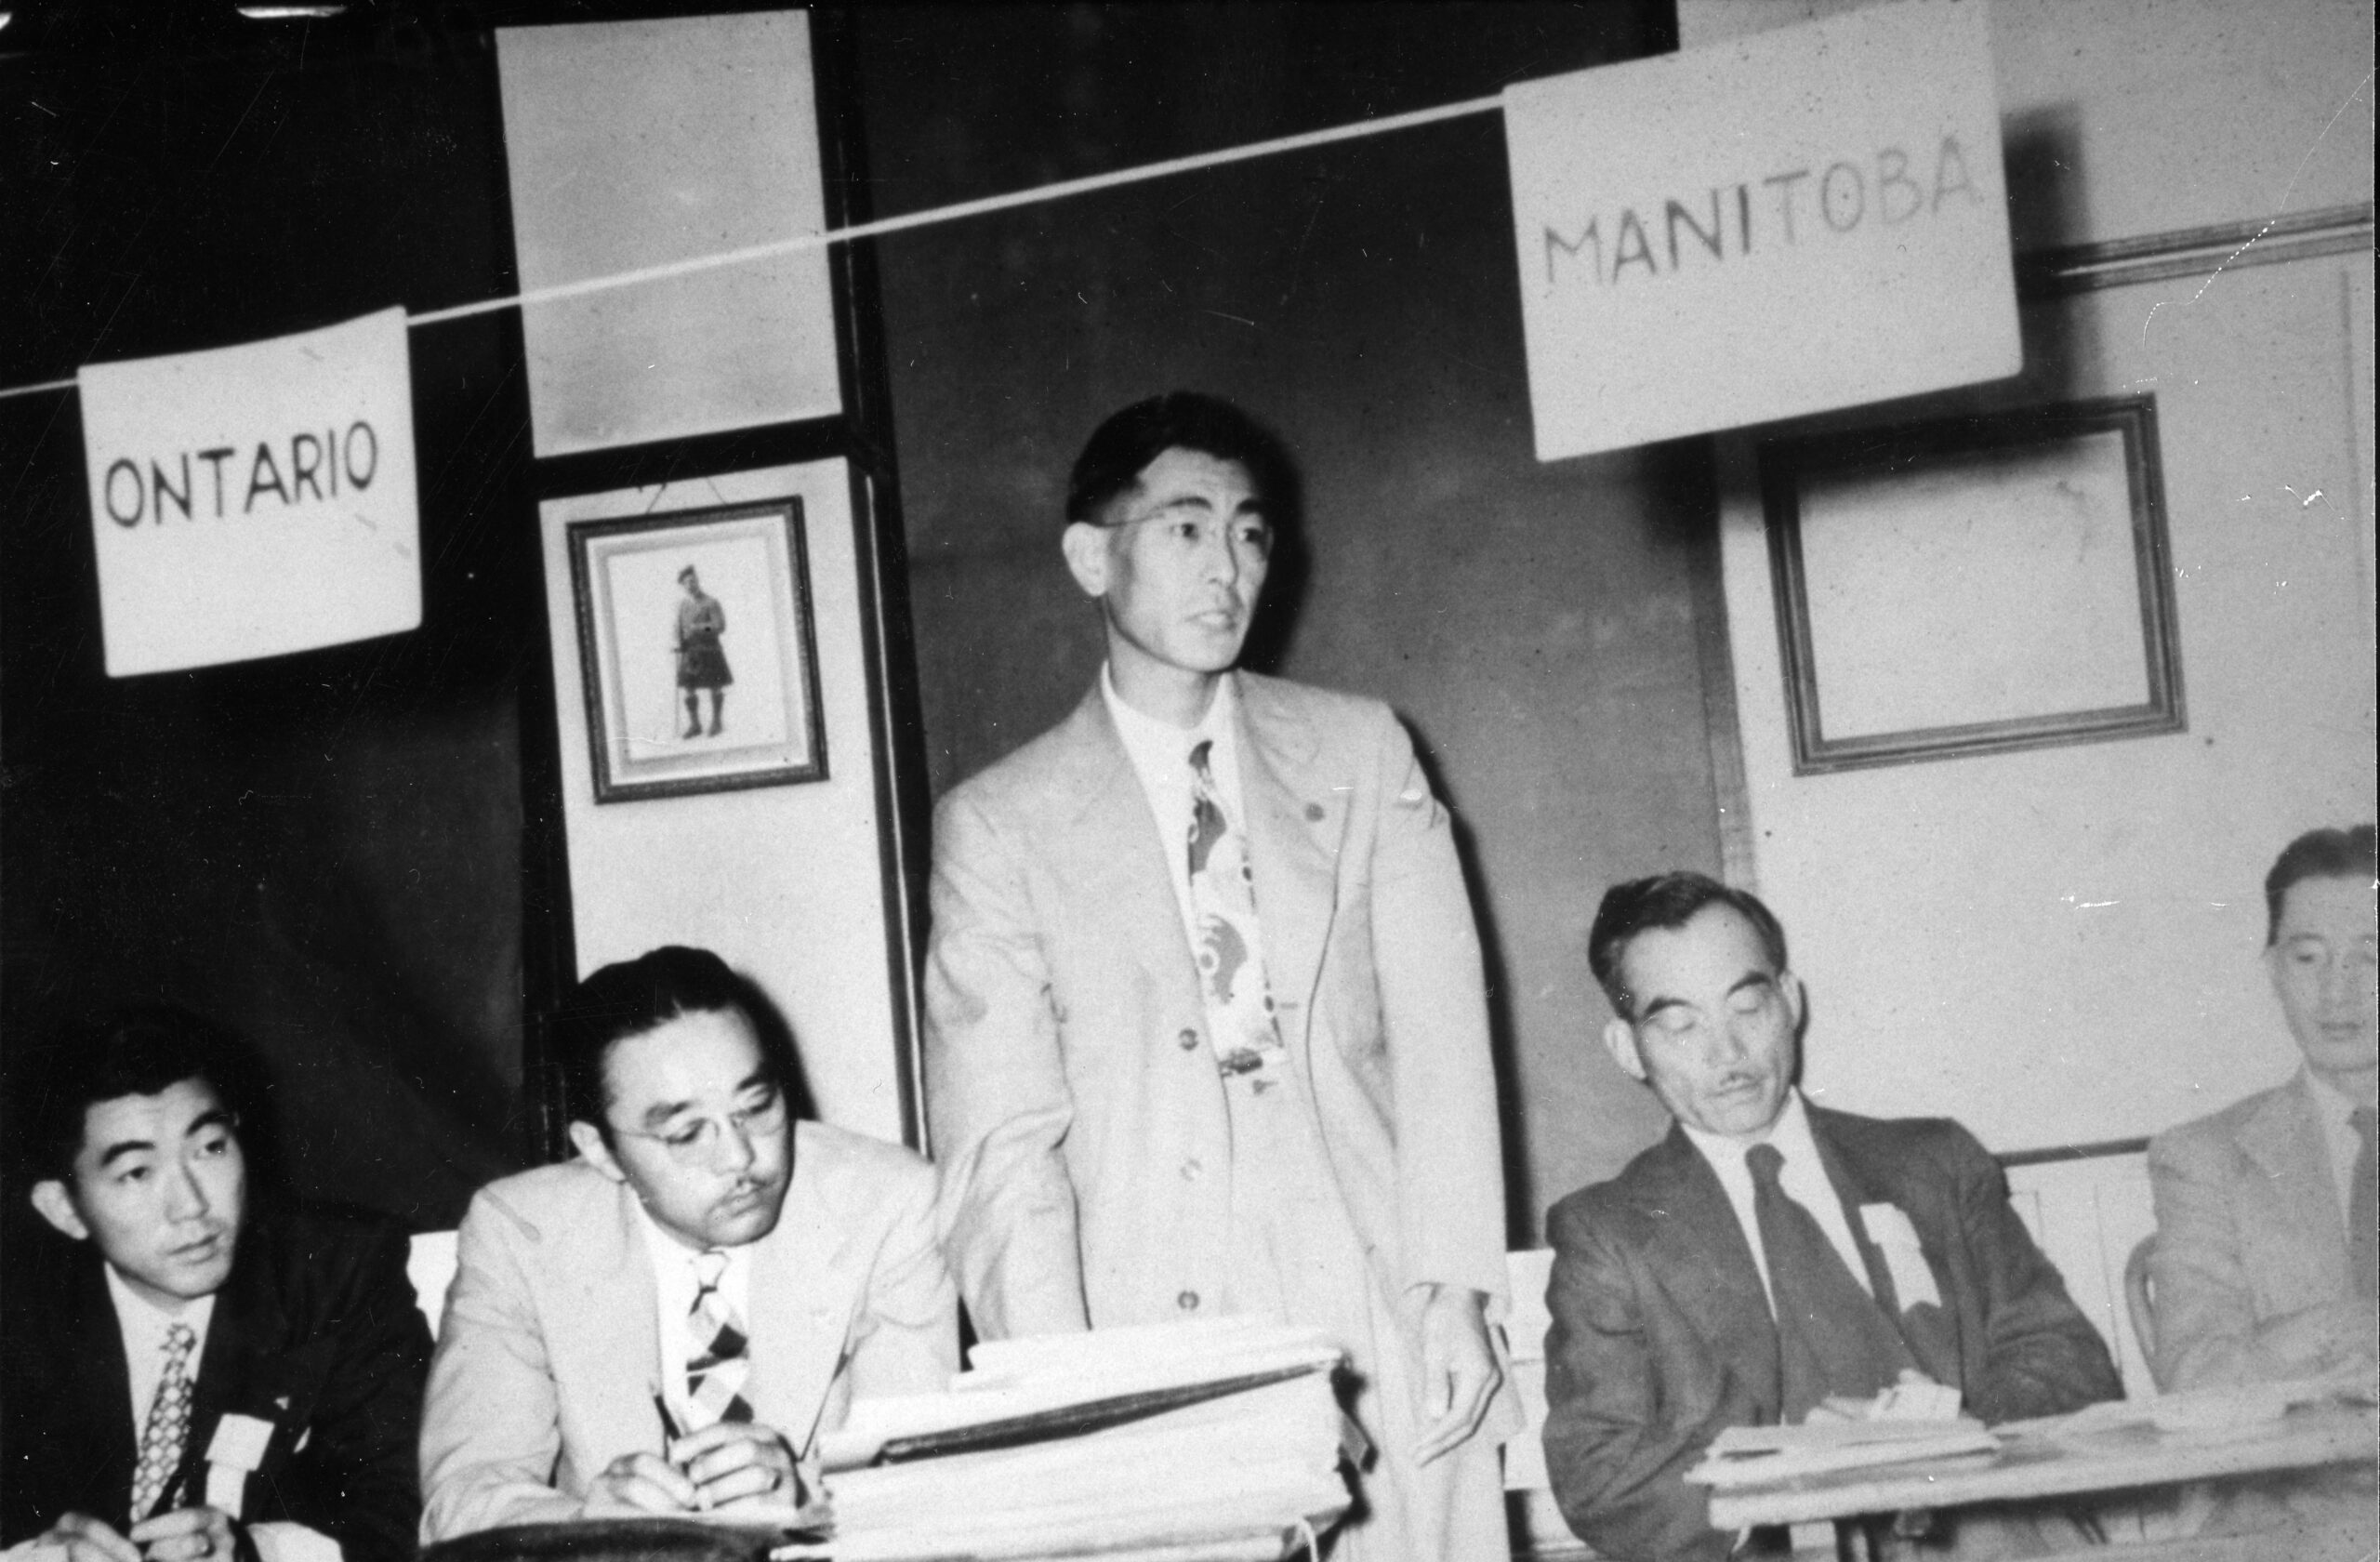 Four Asian men are seated at tables as one man stands and speaks. Signs above the tables read "Ontario" and "Manitoba."